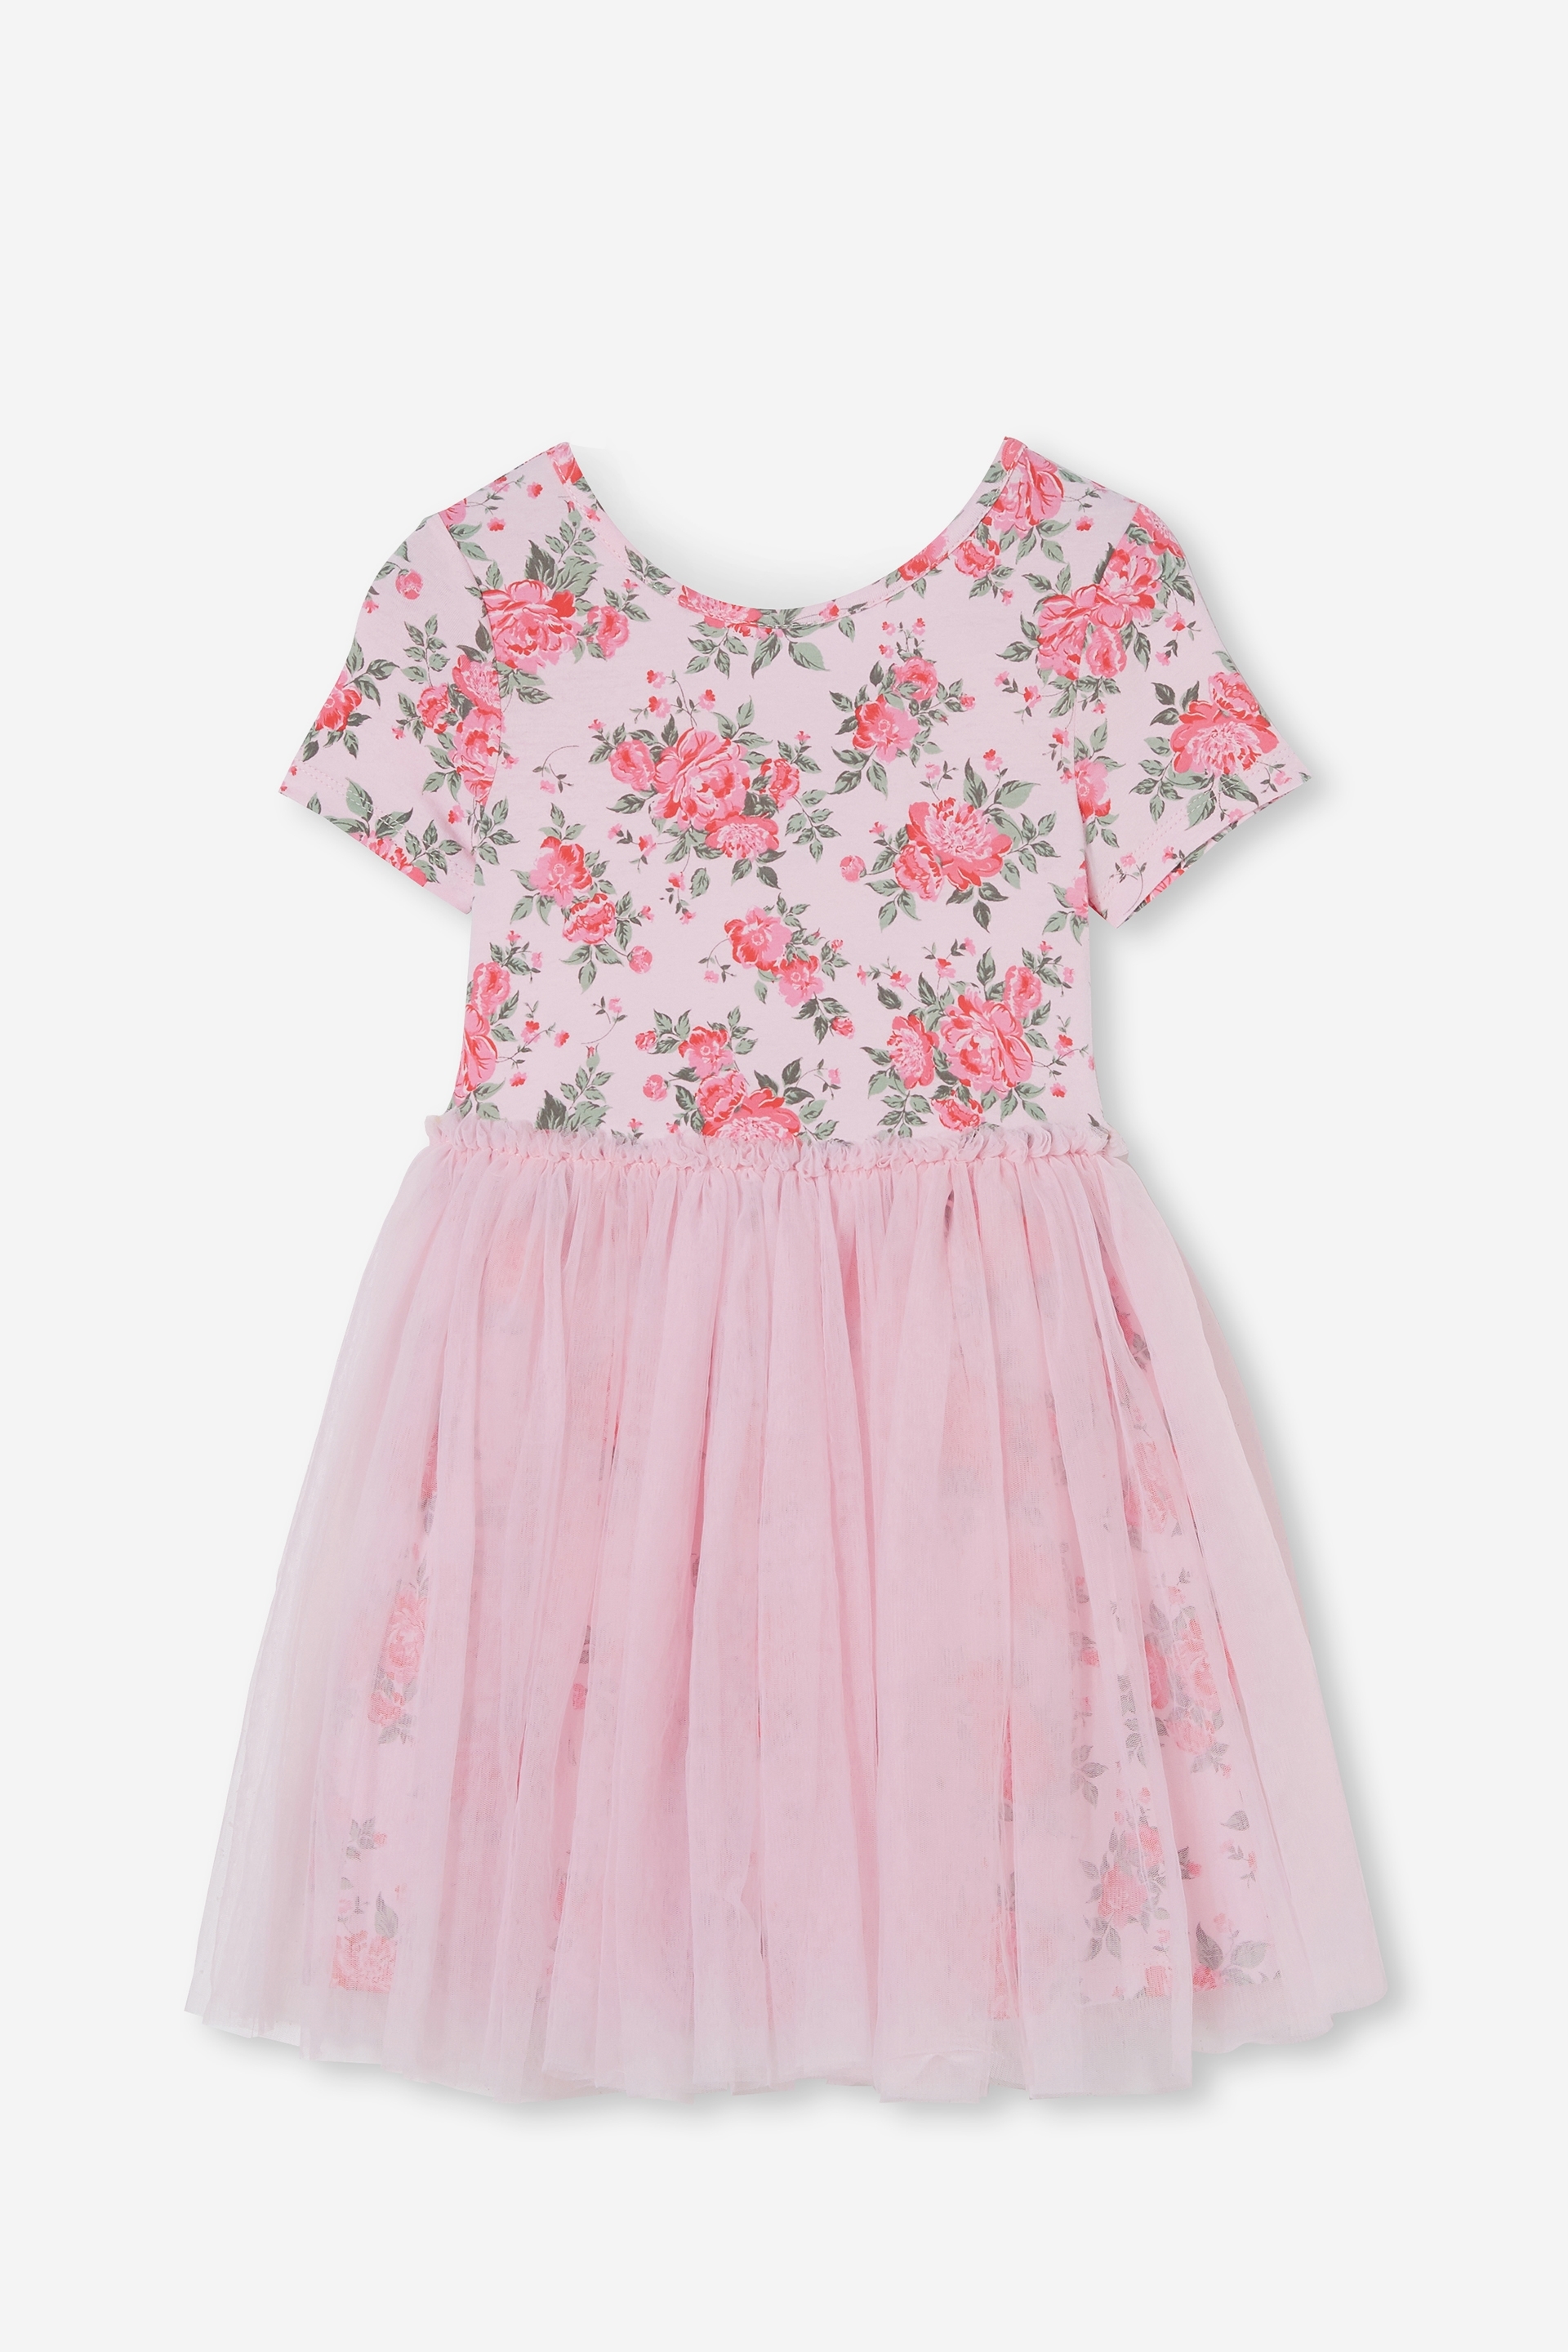 Cotton On Kids - Ivy Dress Up Dress - Cali pink whitby rosie floral